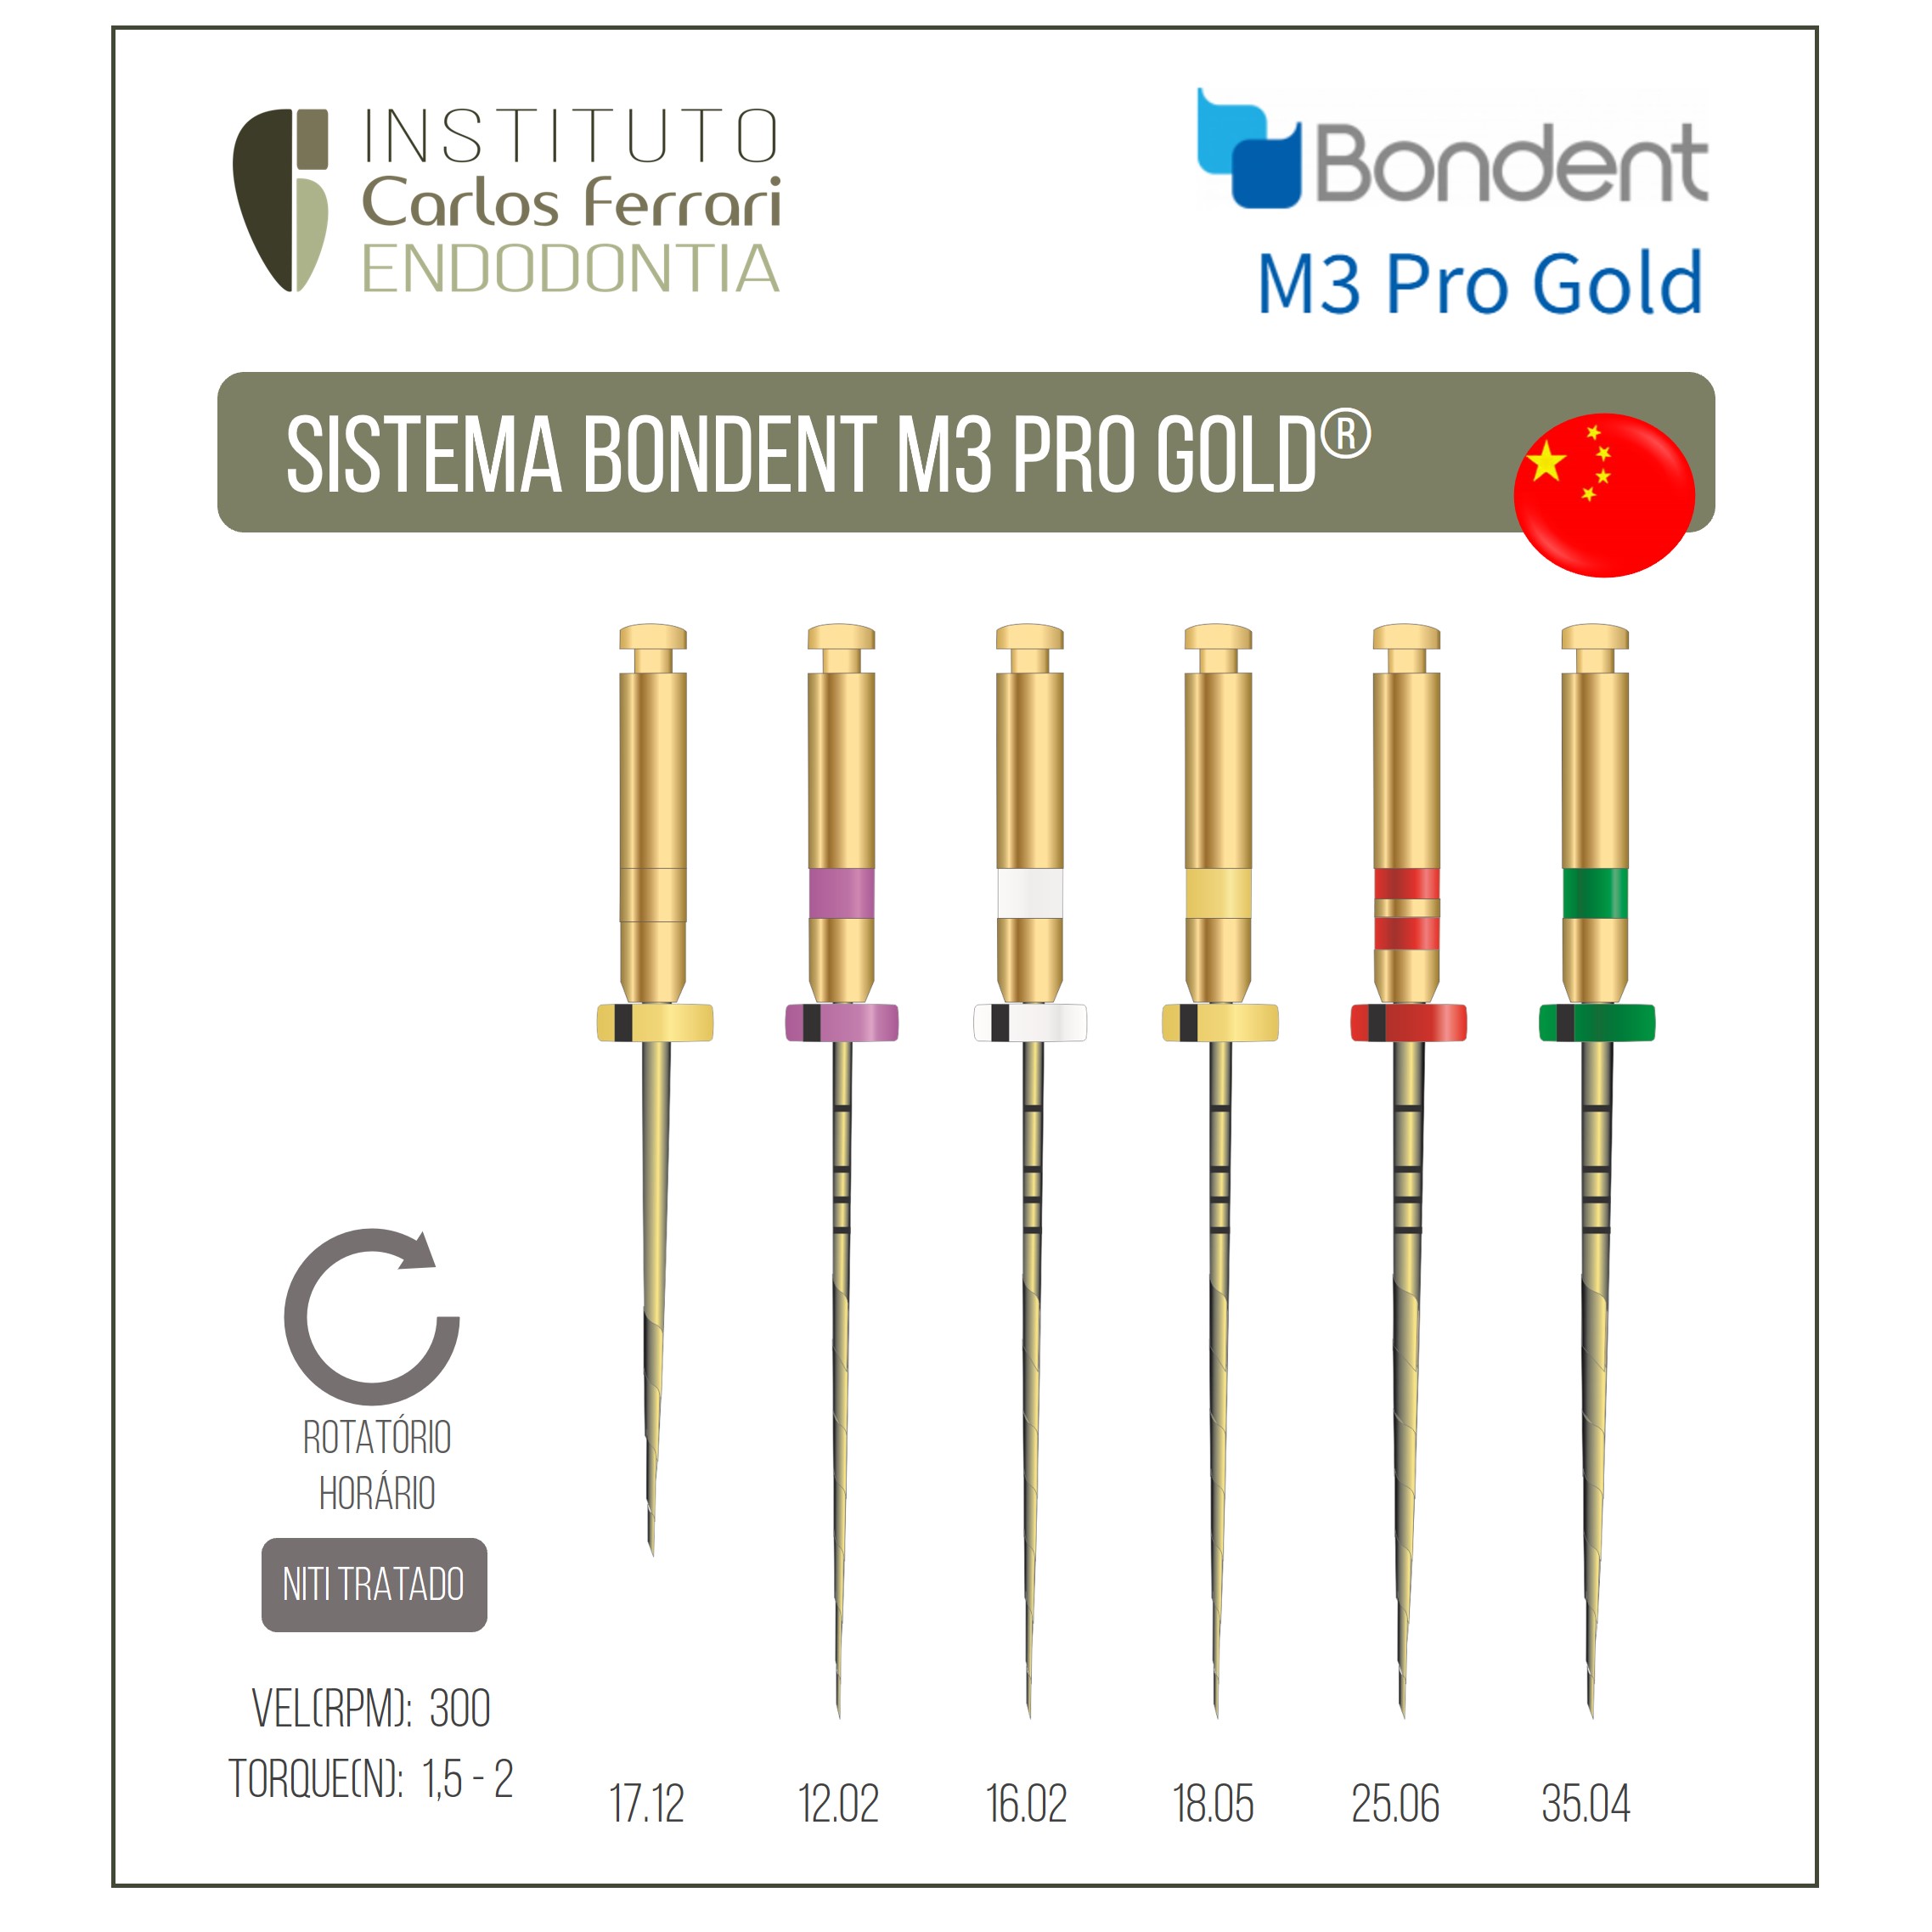 You are currently viewing Bondent M3 Pro Gold Files. Guide to use.